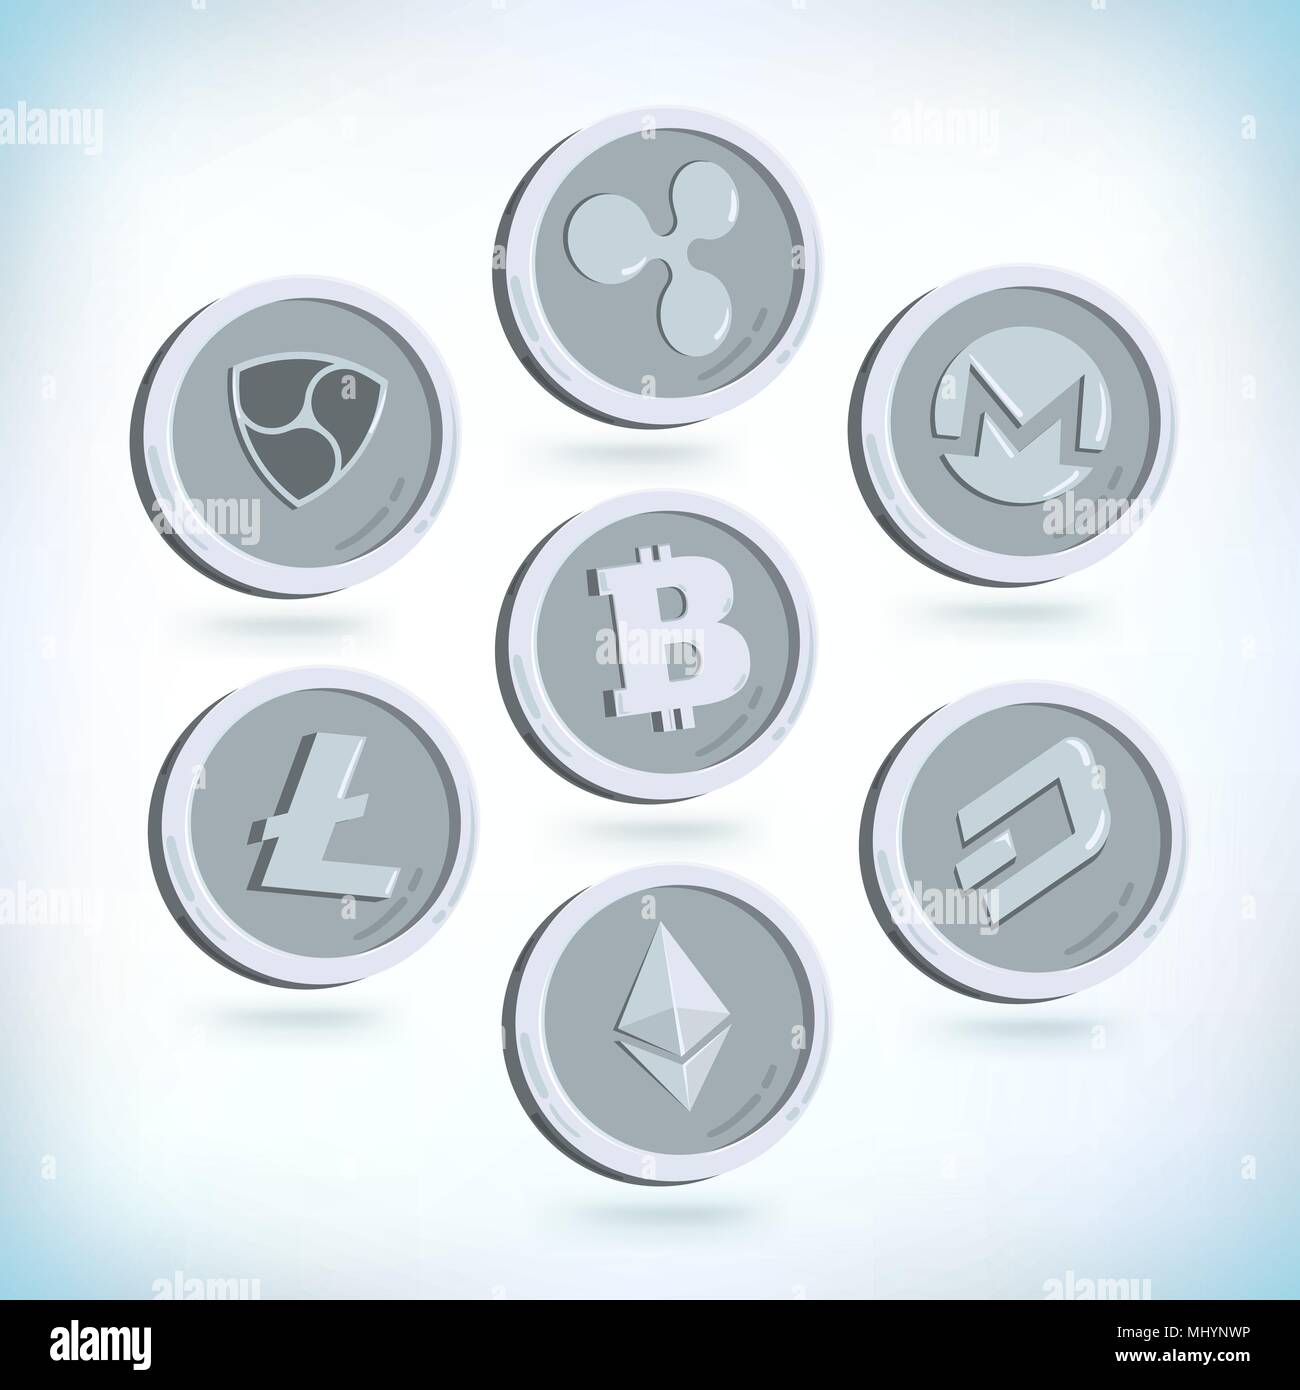 Cryptocurrency icons set. Cryptography currency. Bitcoin, Dash, Ethereum, litecoin, monero, nem, ripple silver coins. Financial technology. Digital cu Stock Vector